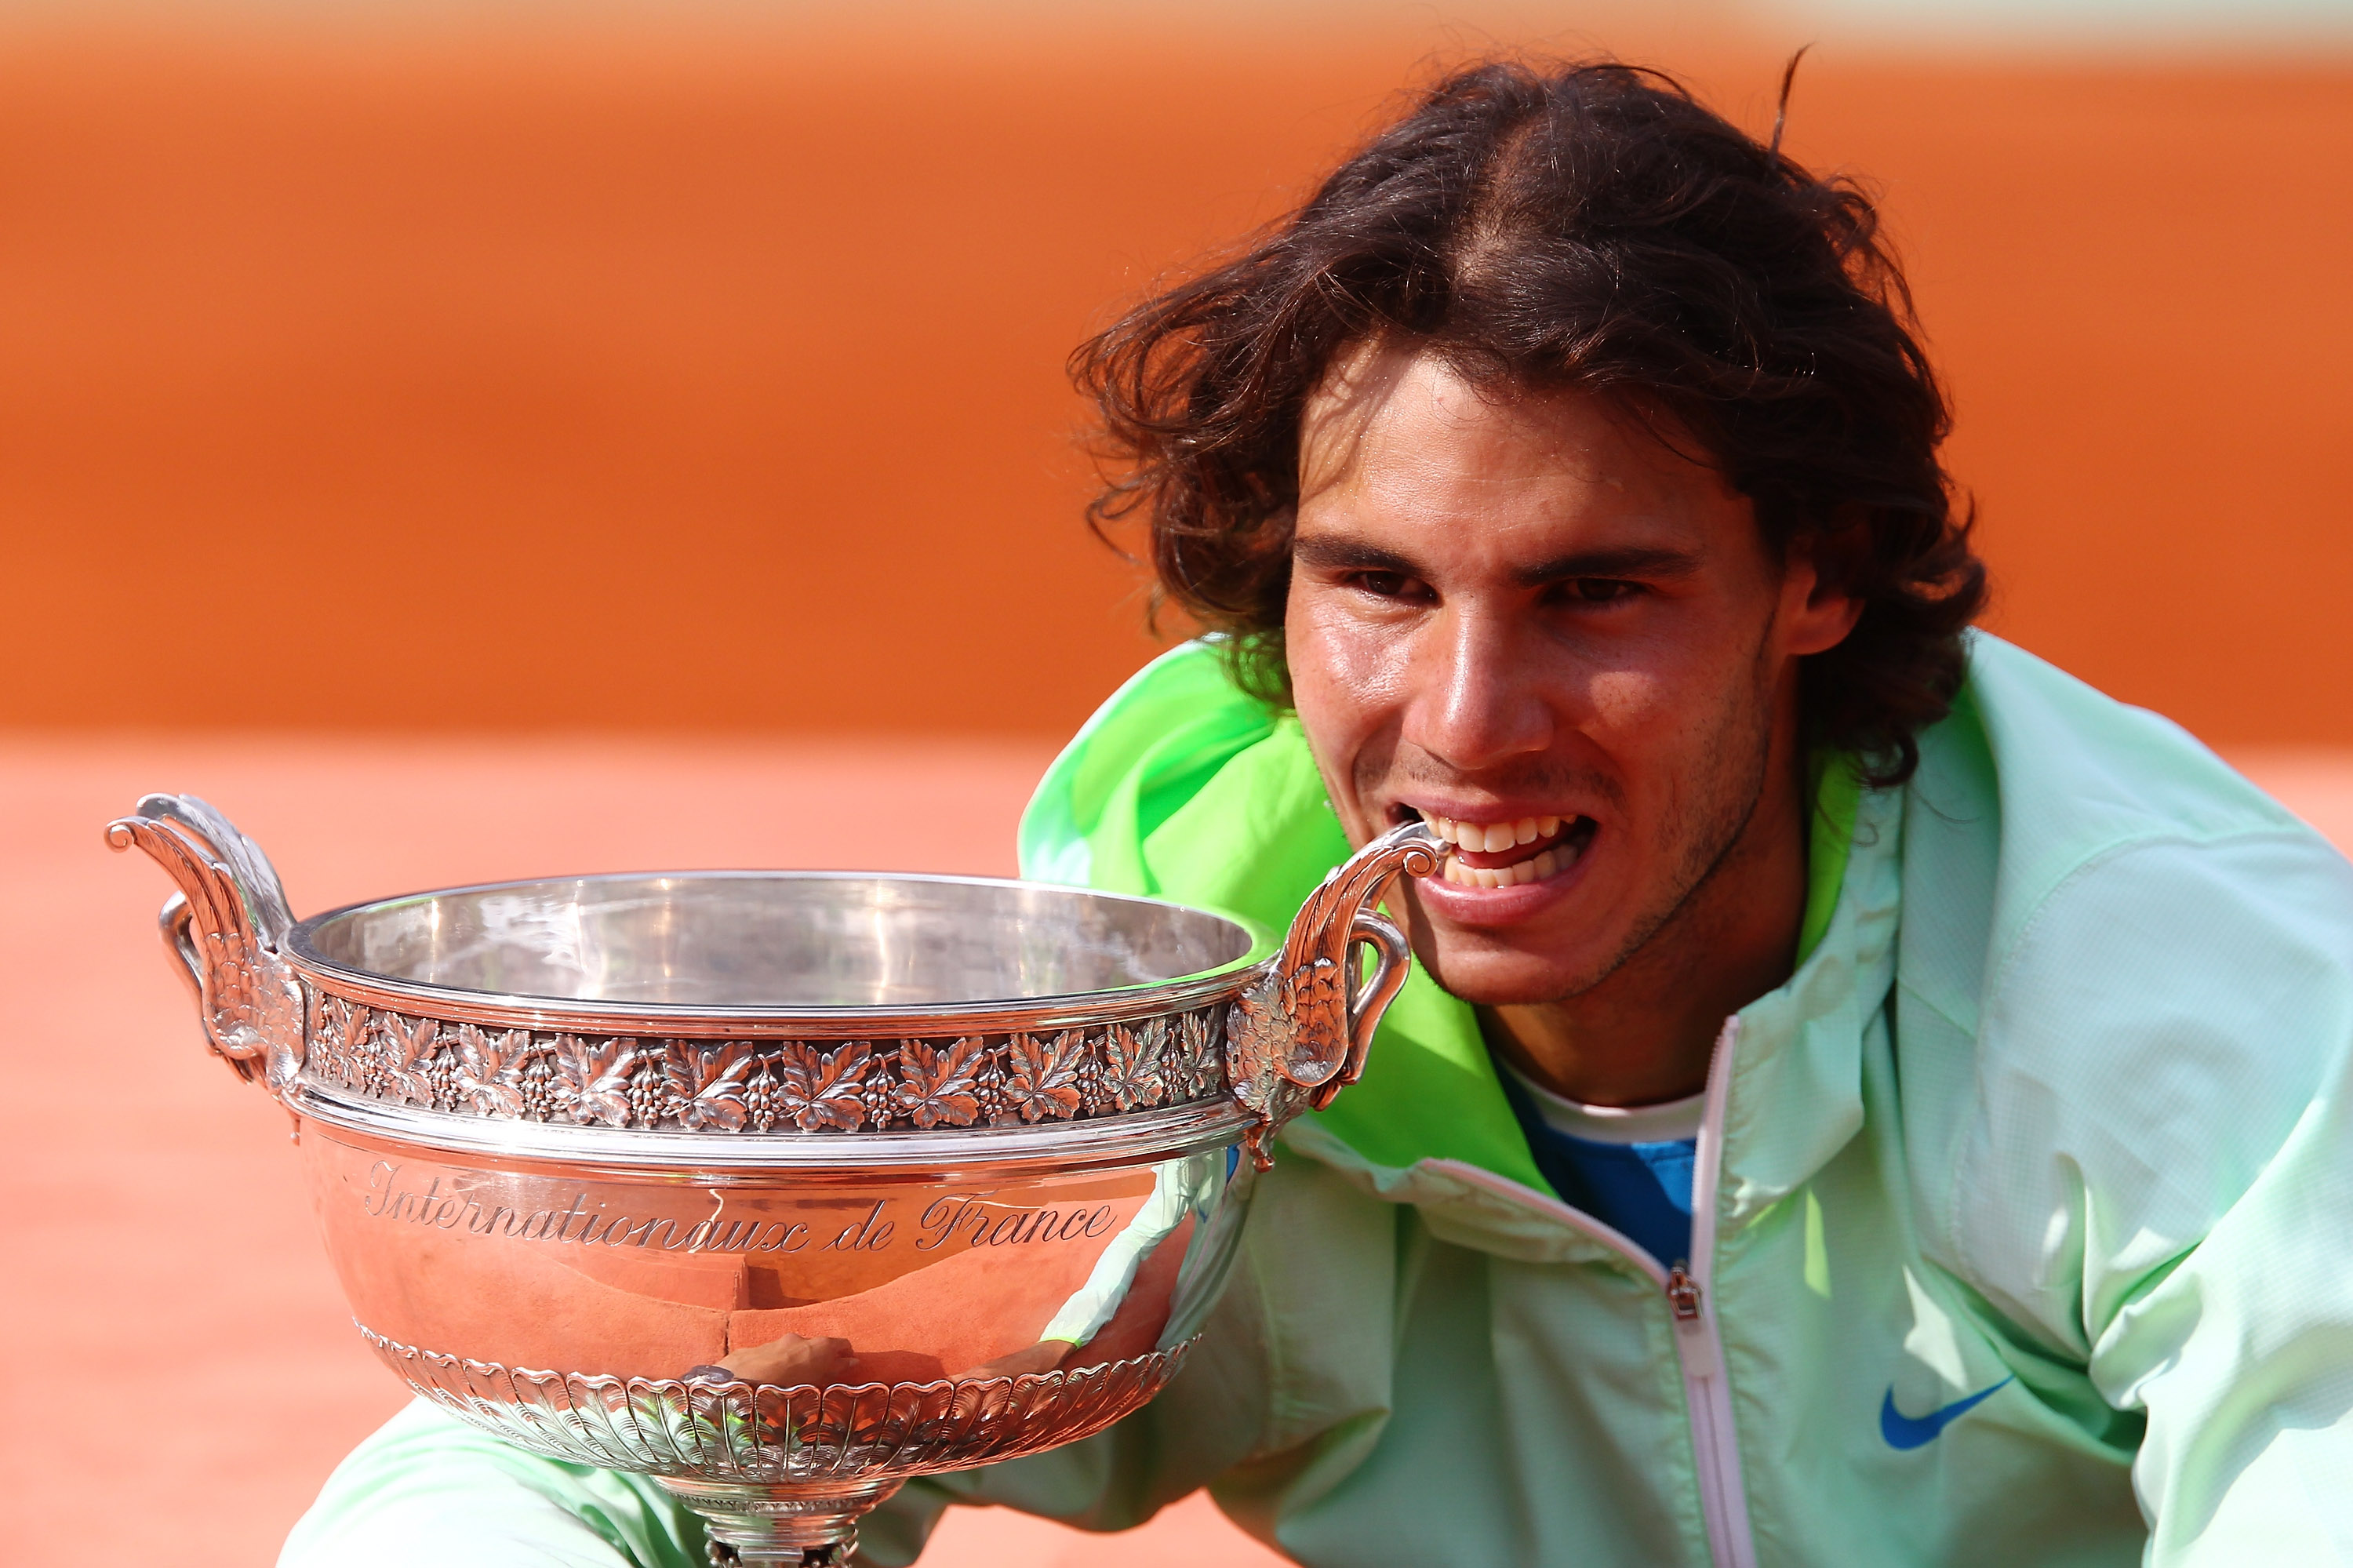 PARIS - JUNE 06:  Rafael Nadal of Spain celebrates with the trophy after winning the men's singles final match between Rafael Nadal of Spain and Robin Soderling of Sweden on day fifteen of the French Open at Roland Garros on June 6, 2010 in Paris, France.